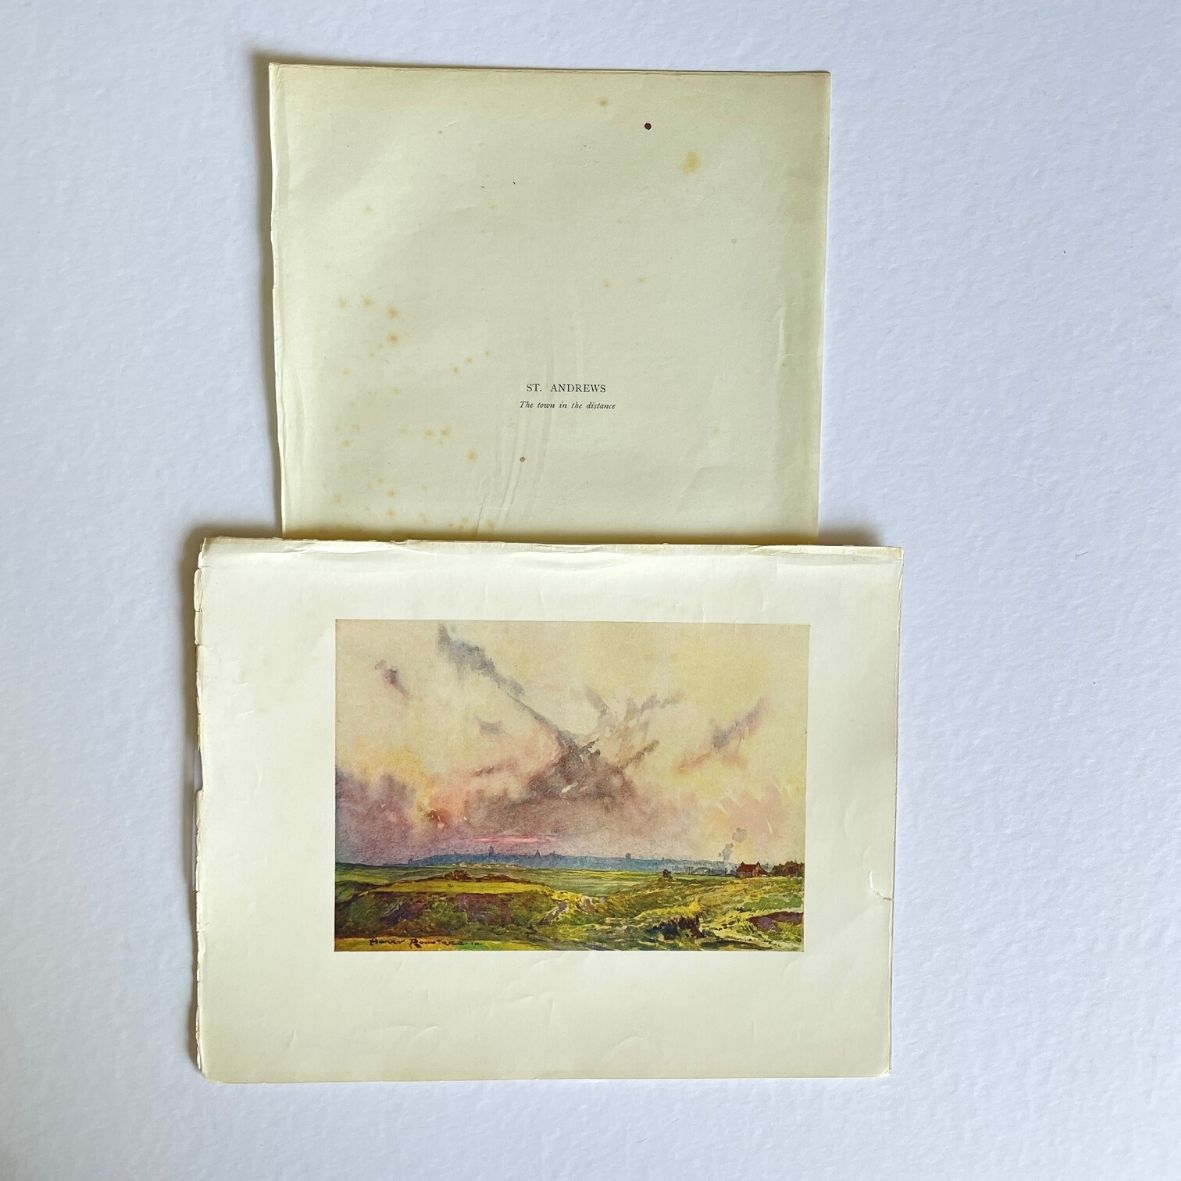 Harry Rountree Original First Edition Book Plates - Only One Of Each Available!